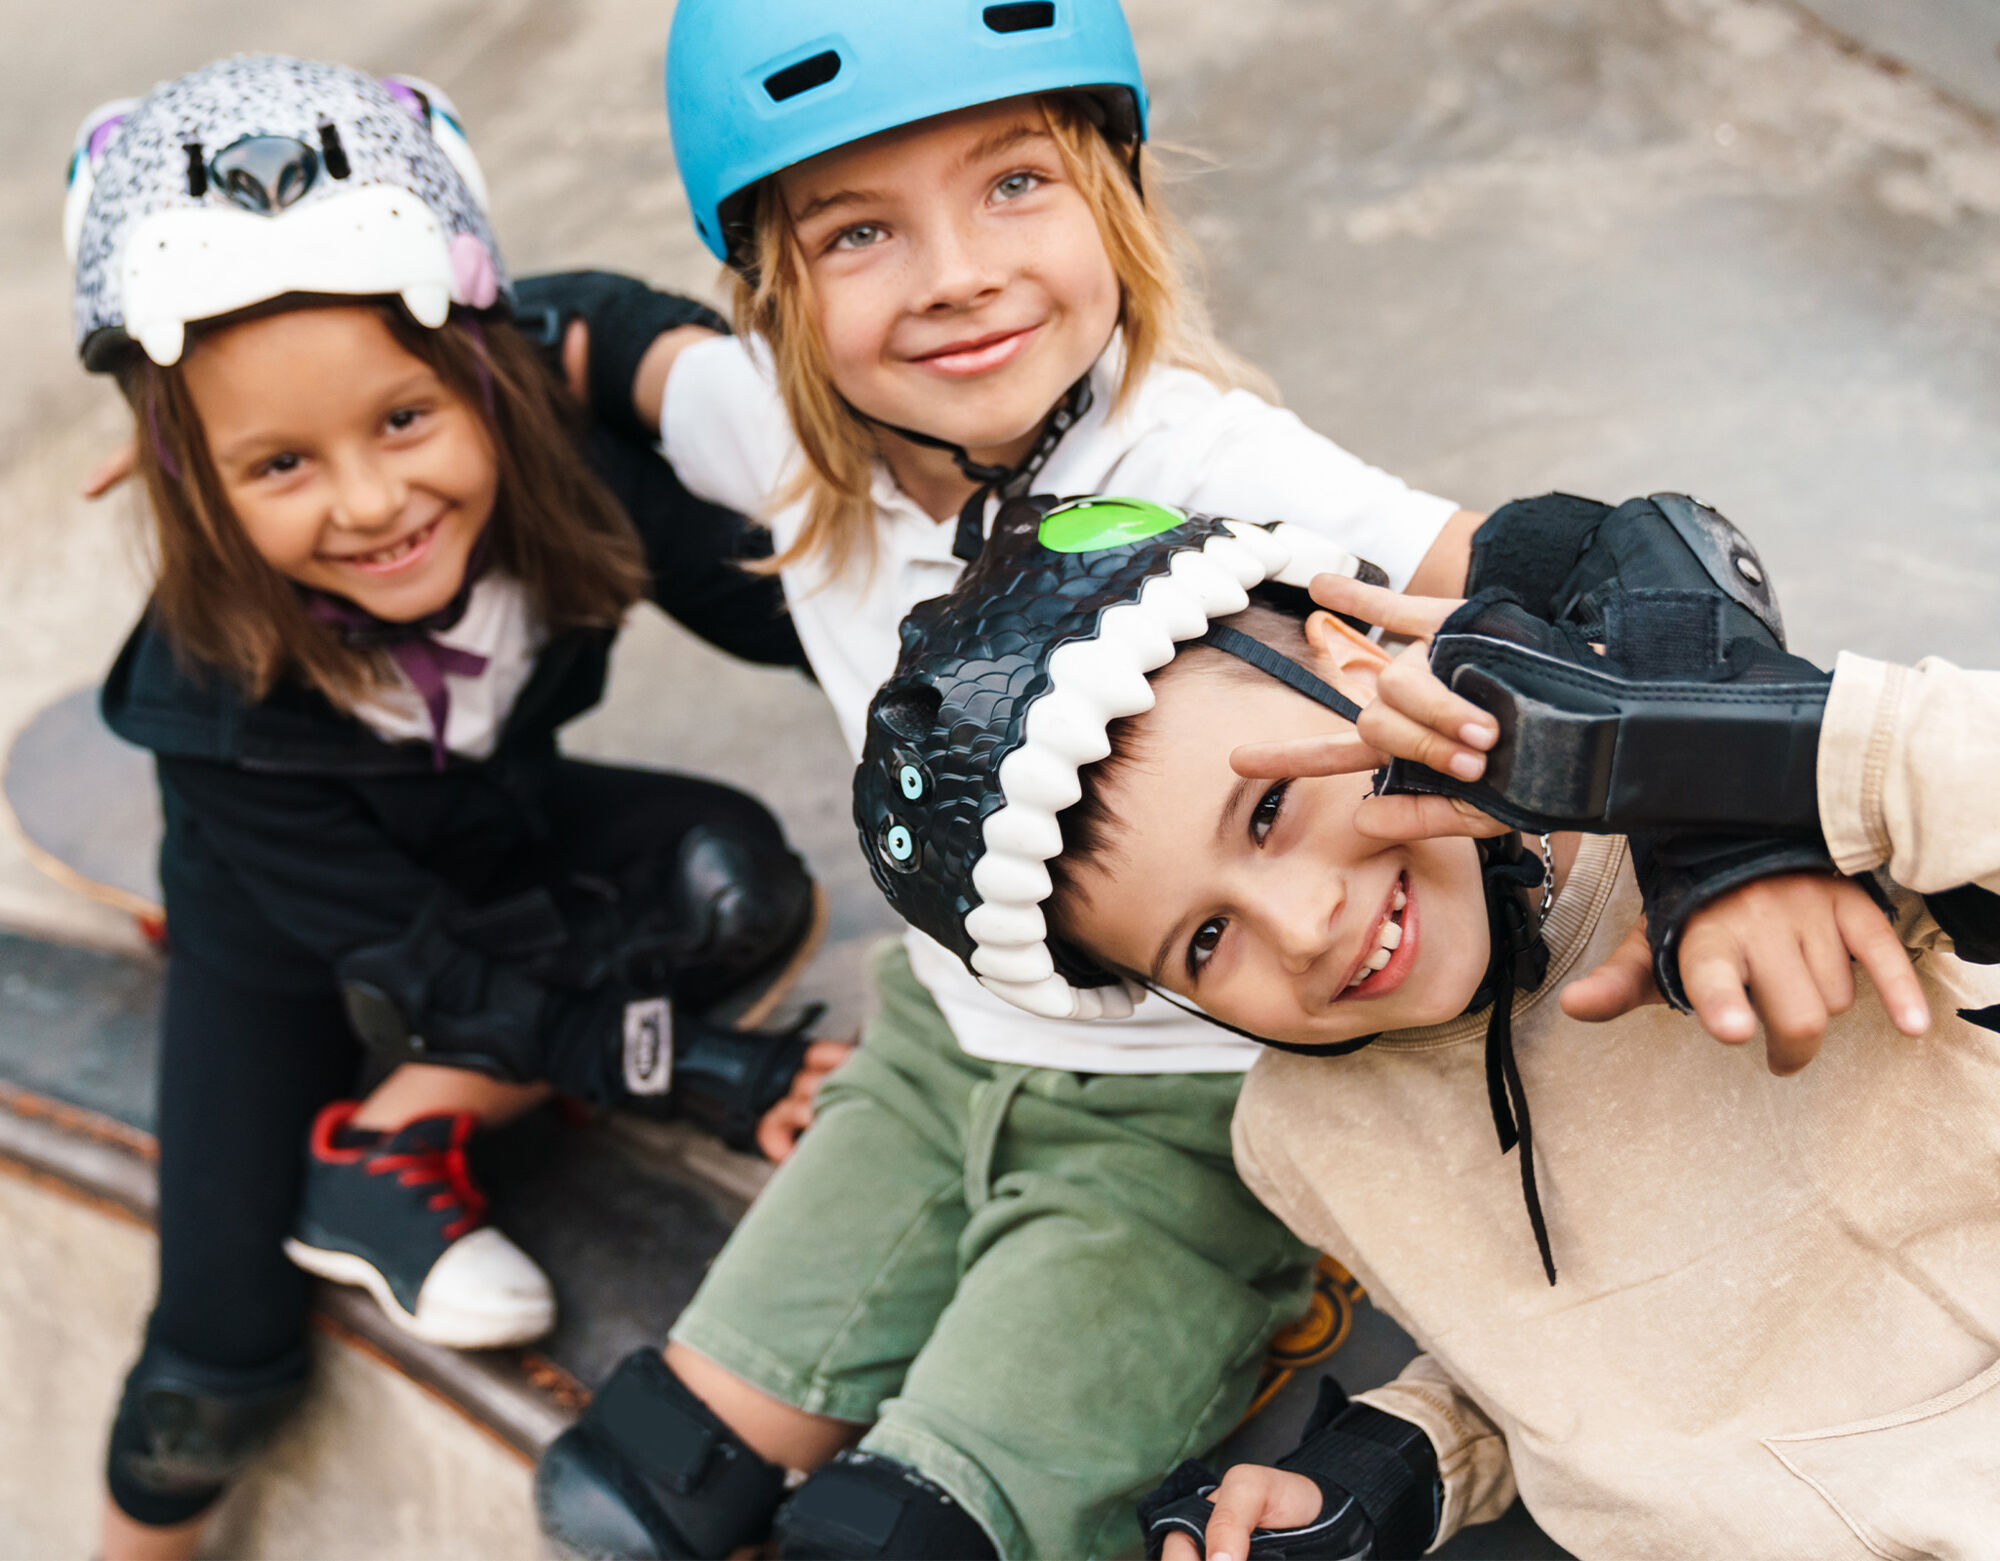 Three children wearing kneepads and helmets smile while sitting on skateboards.